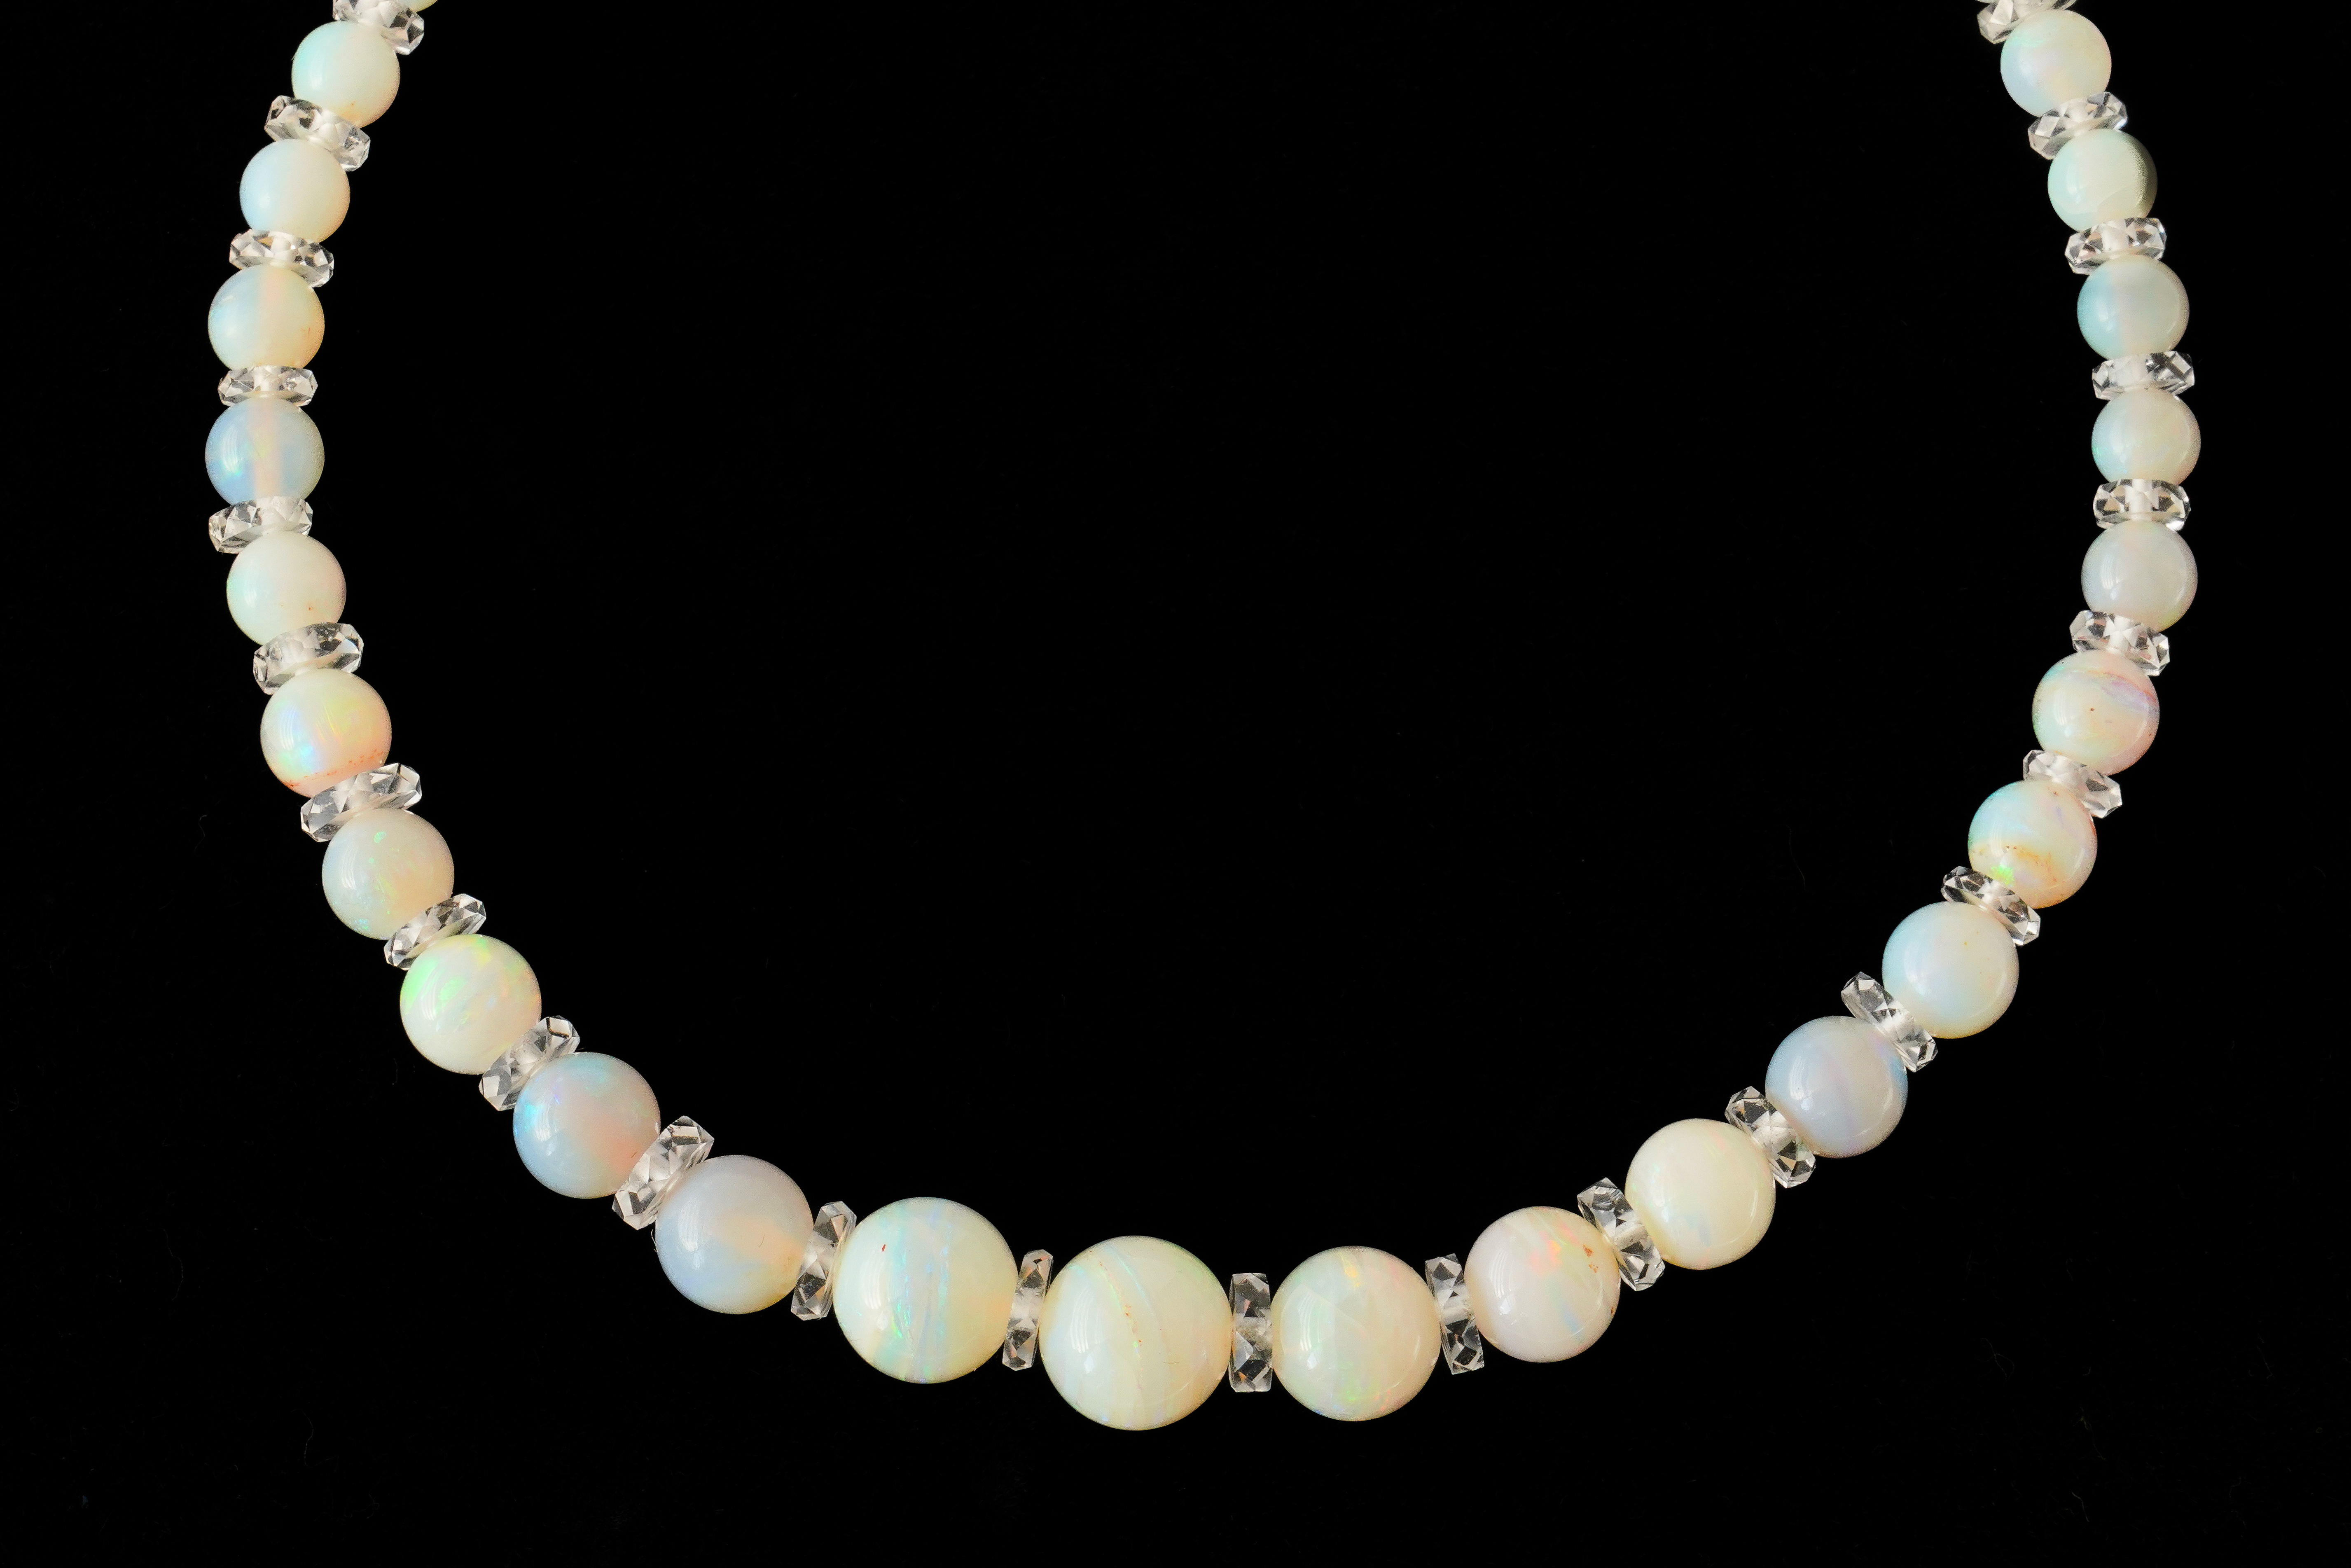 AN OPAL BEAD AND ROCK CRYSTAL NECKLACE